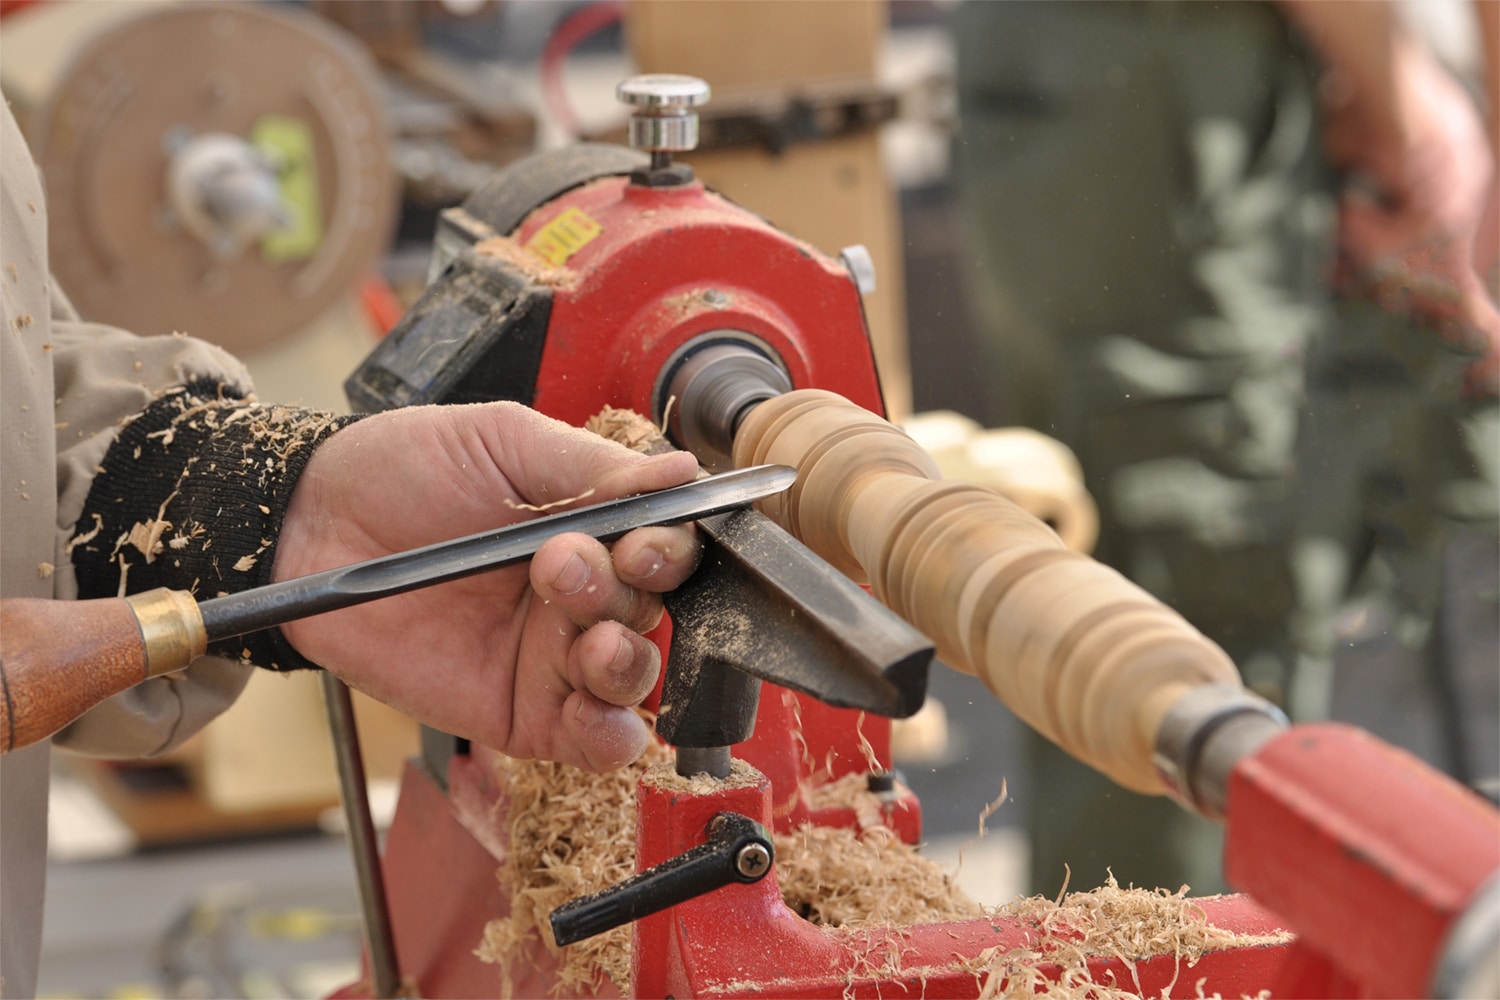 This is the cover photo for our Best Wood Lathe article. It shows a person using a wood lathe to shave and shape a wood dowel. There are wood shavings flying all over, and a blurred background with various tools in the peripheral.